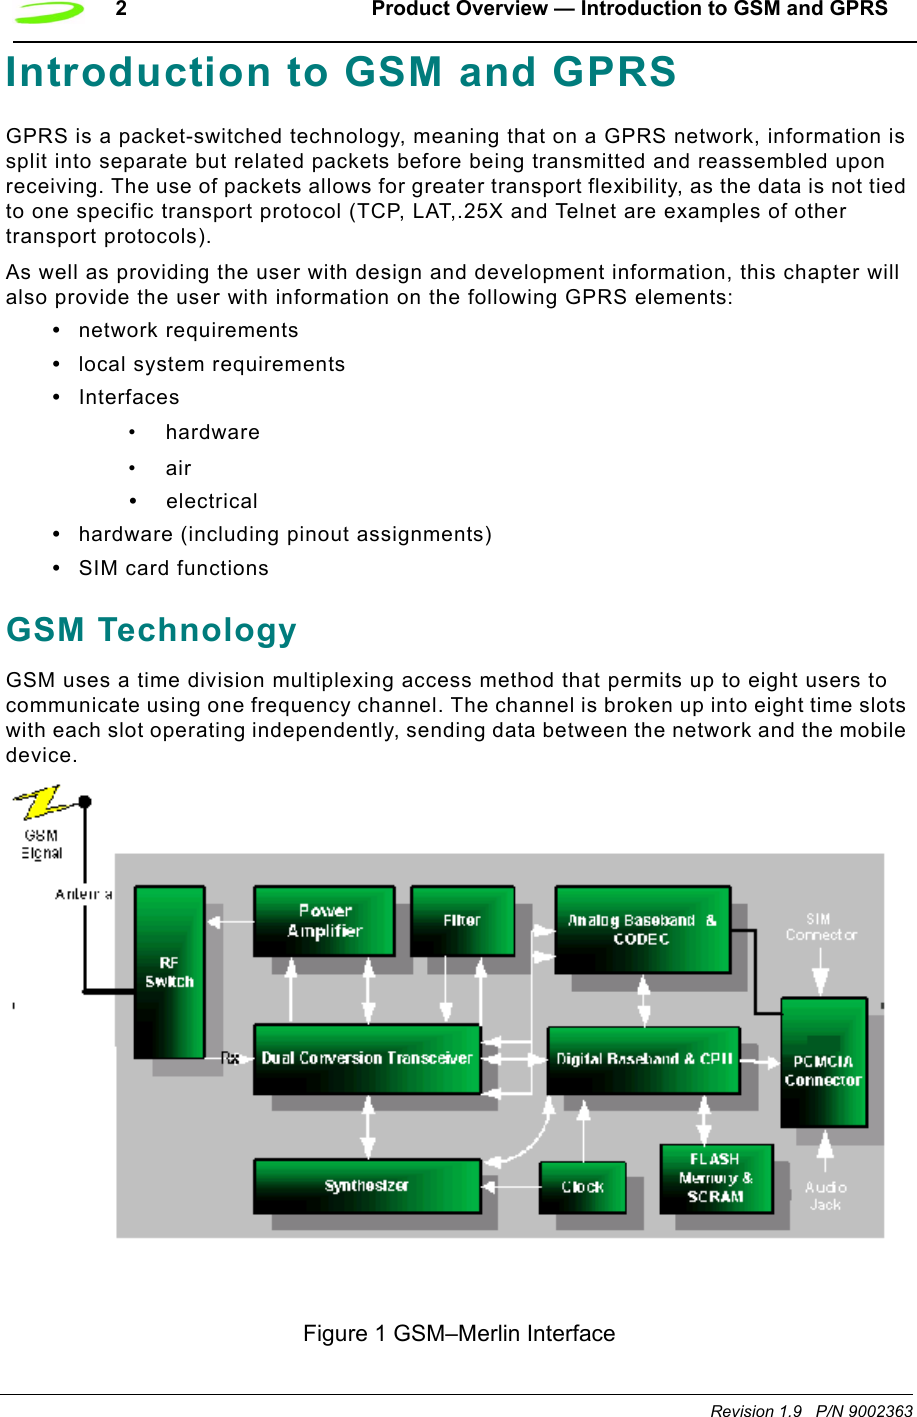 2 Product Overview — Introduction to GSM and GPRSRevision 1.9   P/N 9002363Introduction to GSM and GPRSGPRS is a packet-switched technology, meaning that on a GPRS network, information is split into separate but related packets before being transmitted and reassembled upon receiving. The use of packets allows for greater transport flexibility, as the data is not tied to one specific transport protocol (TCP, LAT,.25X and Telnet are examples of other transport protocols).As well as providing the user with design and development information, this chapter will also provide the user with information on the following GPRS elements:•network requirements•local system requirements•Interfaces• hardware•air•electrical•hardware (including pinout assignments)•SIM card functionsGSM TechnologyGSM uses a time division multiplexing access method that permits up to eight users to communicate using one frequency channel. The channel is broken up into eight time slots with each slot operating independently, sending data between the network and the mobile device. Figure 1 GSM–Merlin Interface